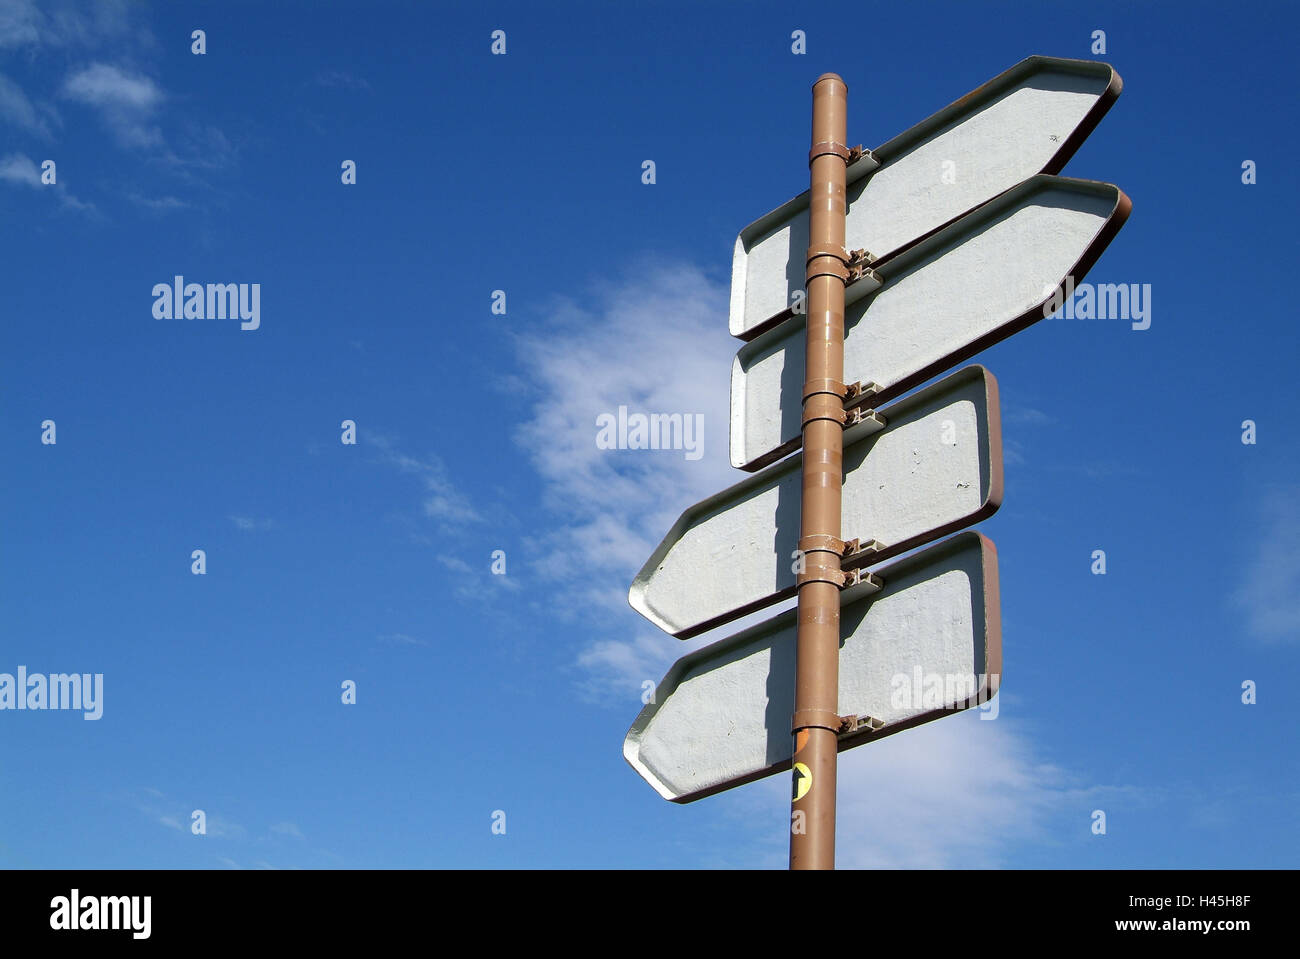 Road signs, sky, blue, Stock Photo